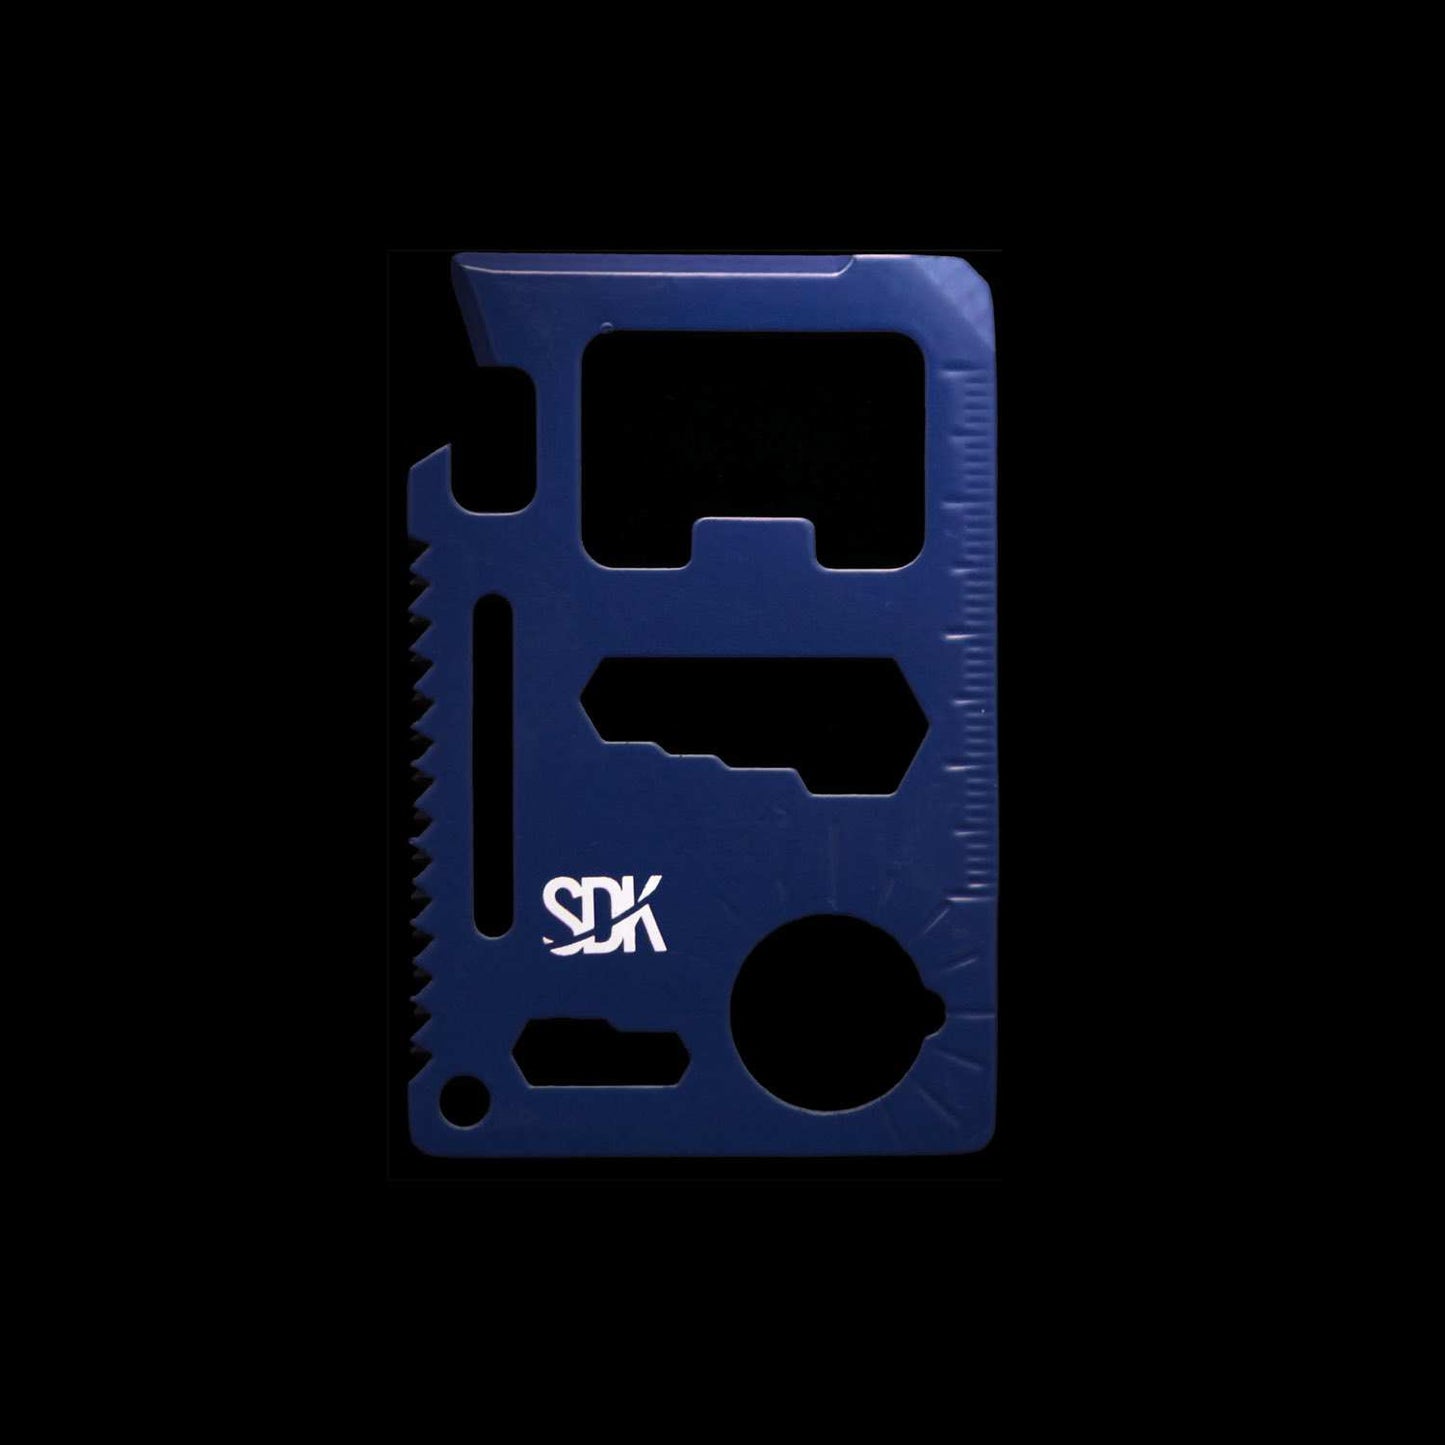 SDK Multi Card Tool, Blue (credit card sized stainless steel tool with 10 functions: Can opener, Knife edge, Screwdriver, Ruler, Cap opener, 2 Position wrench, 4 Position wrench, Butterfly wrench, Saw blade and Direction ancillary indication)